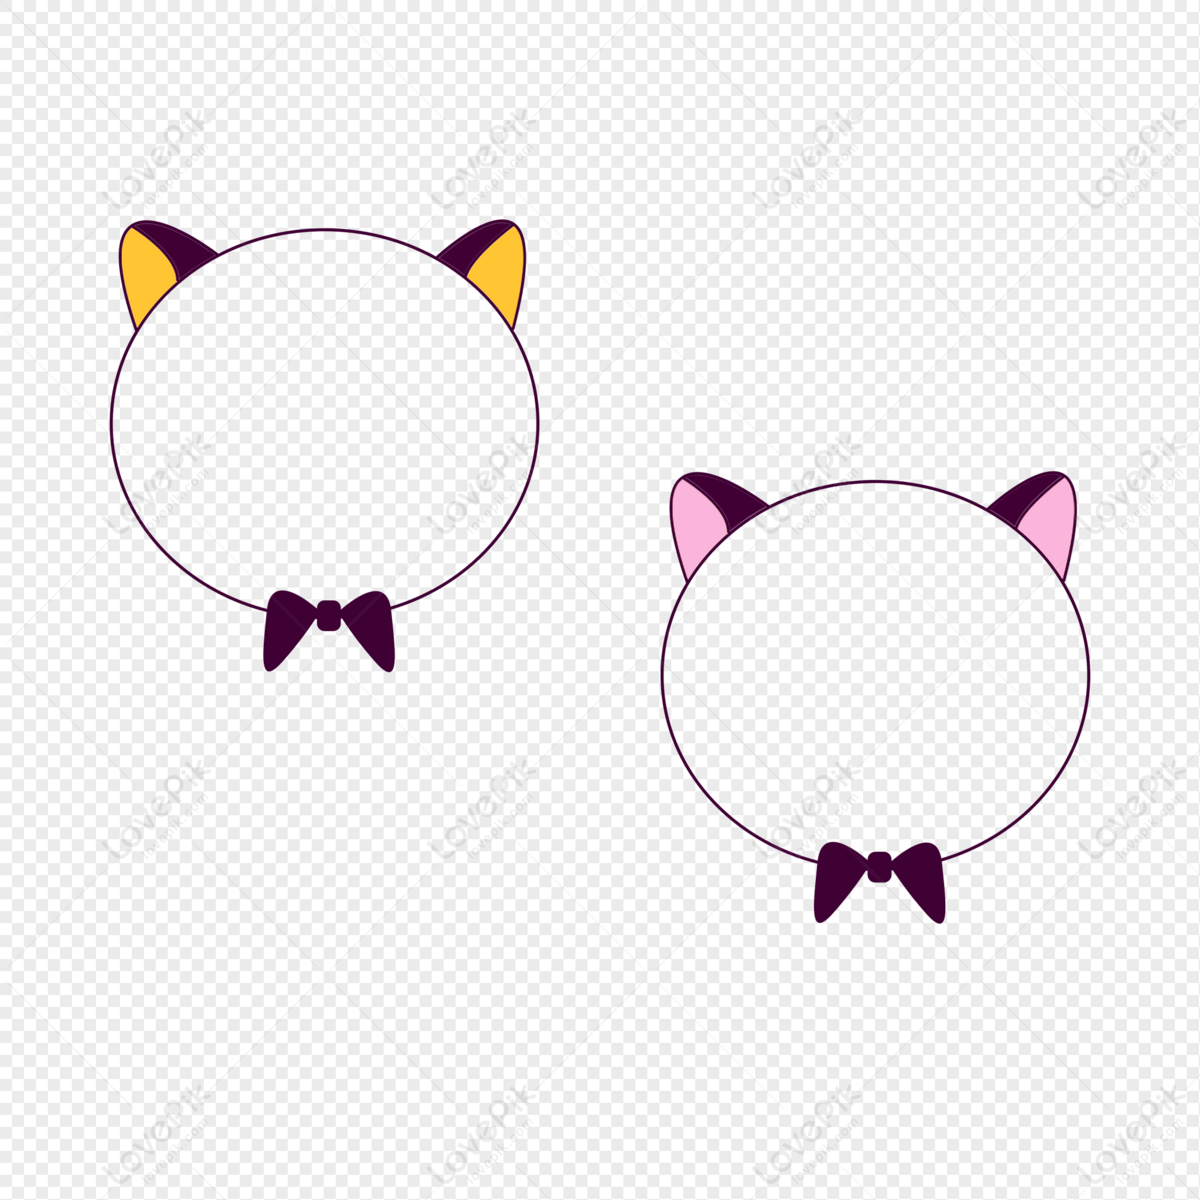 Cat Ears Border PNG Image And Clipart Image For Free Download - Lovepik |  401276378